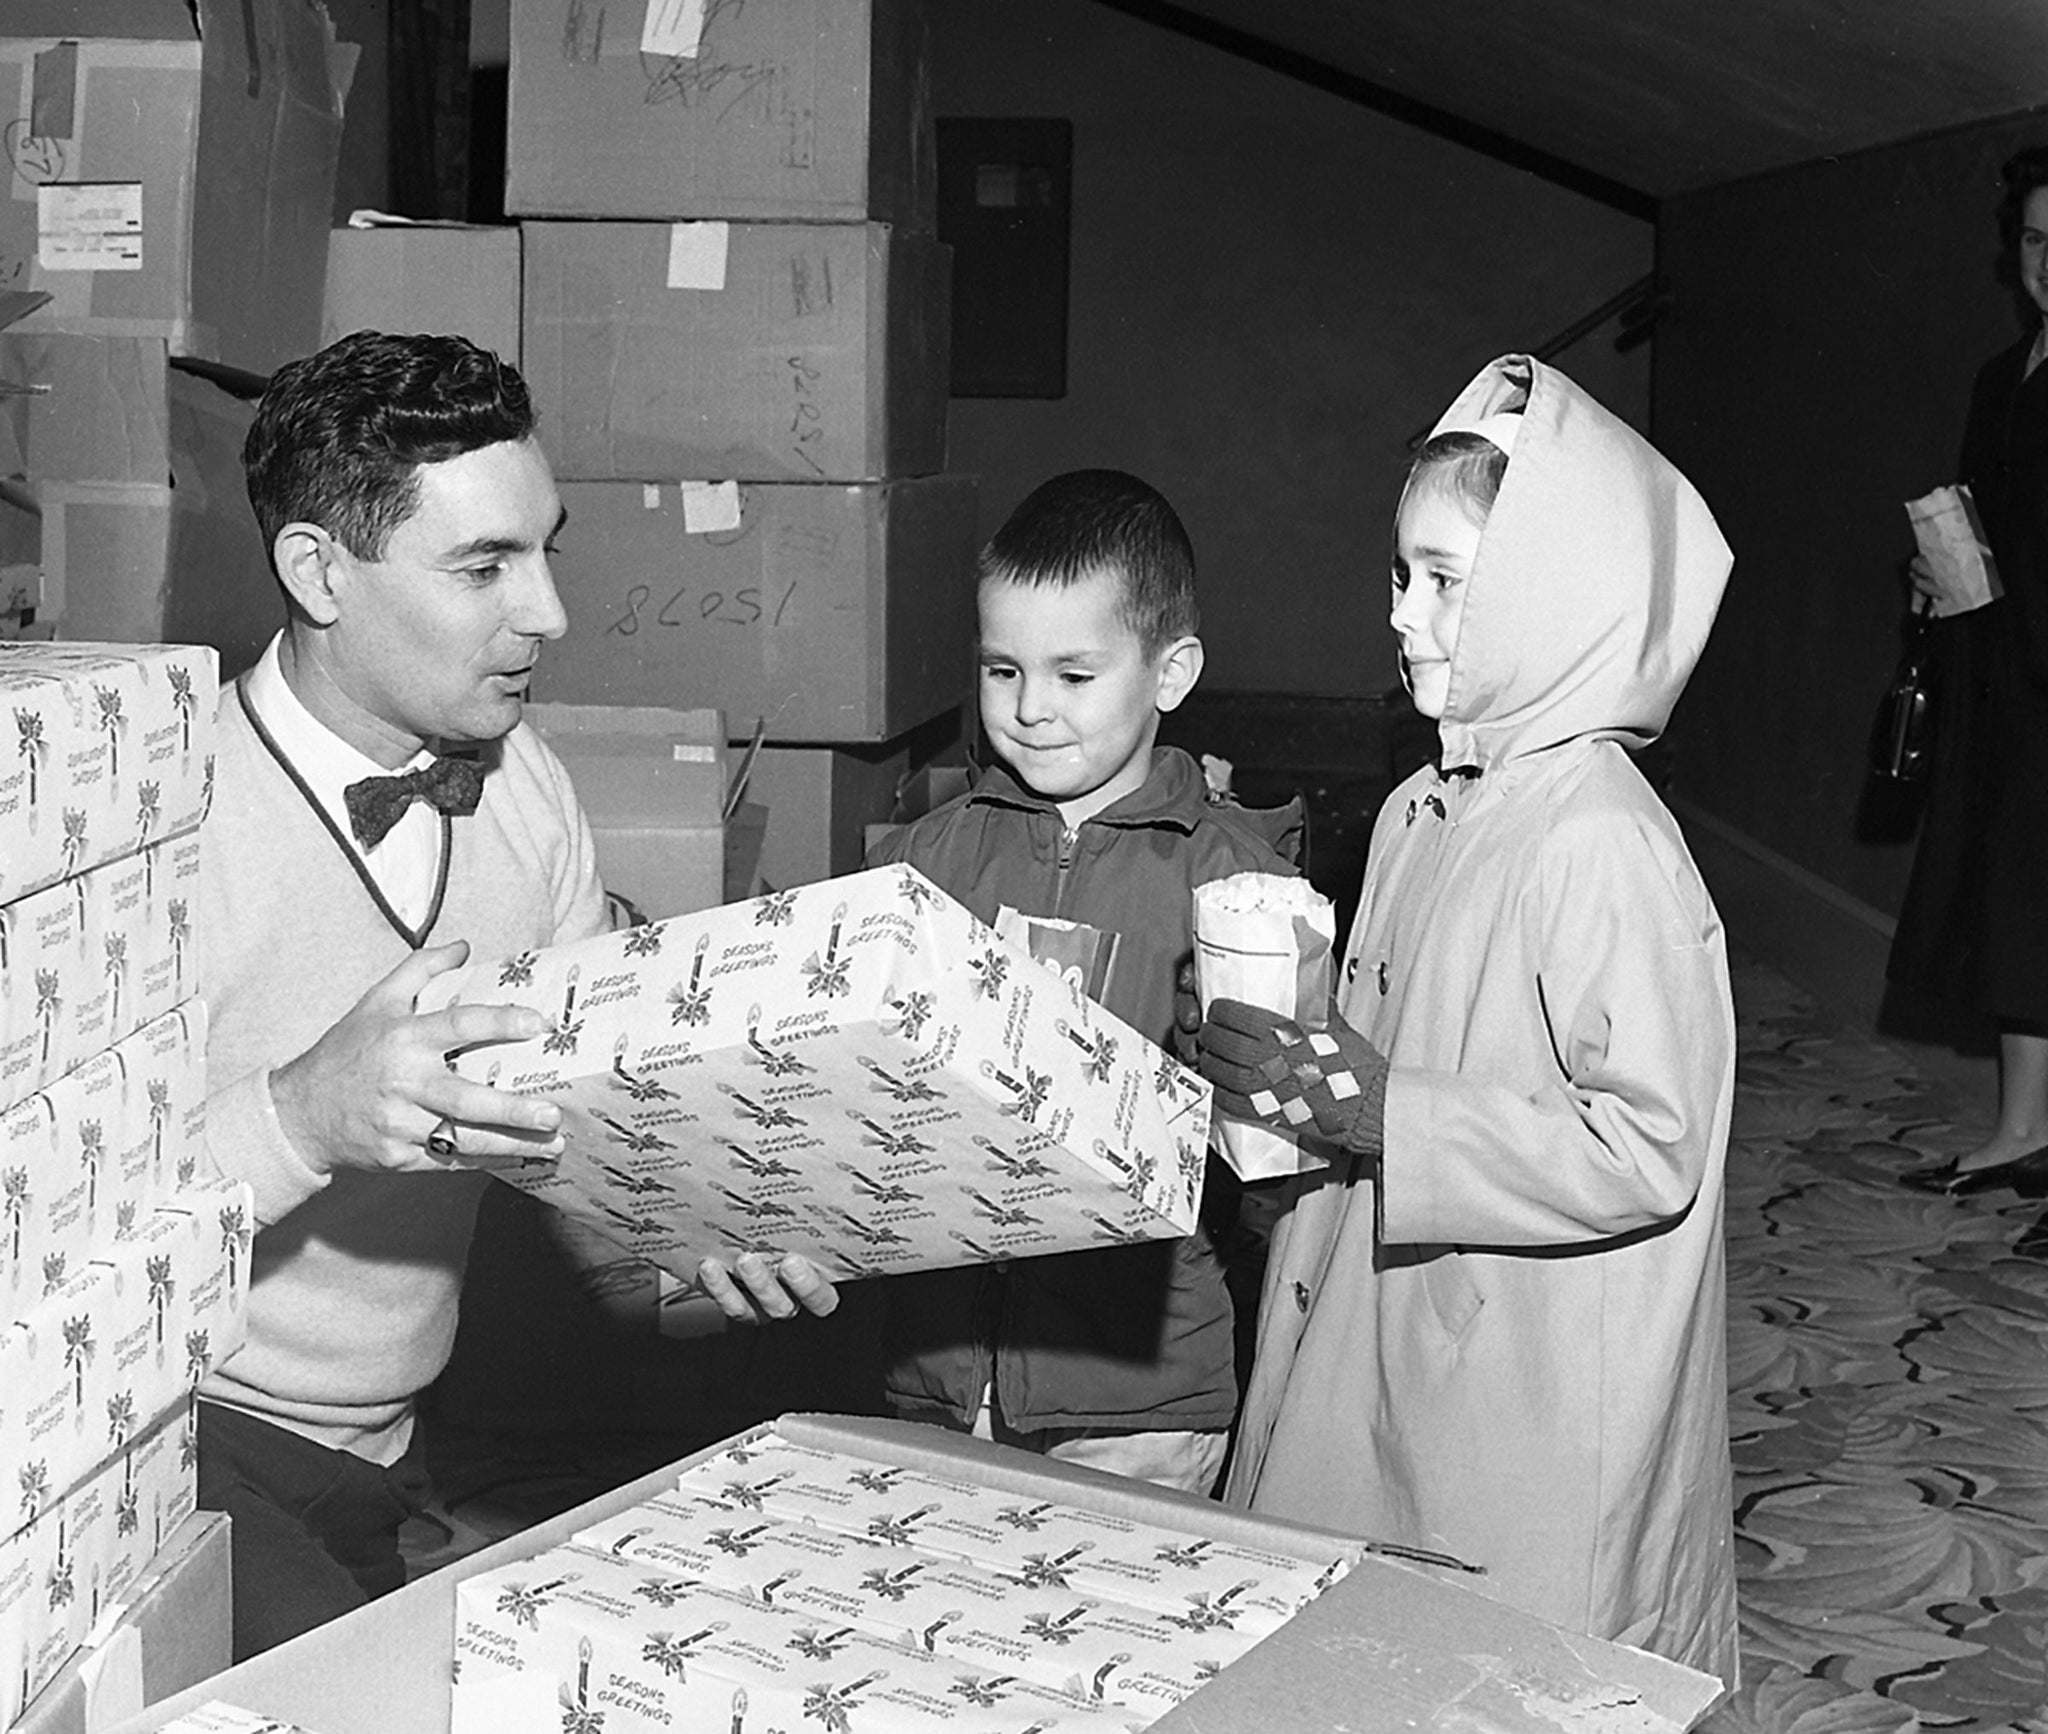 Bob Hammond from Longview Fibre’s accounting department, giving two children a Christmas gift at a Longview Fibre Christmas party at the Columbia Theater, December 21, 1963. -- COWLITZ COUNTY HISTORICAL MUSEUM / #2010.0054.0162